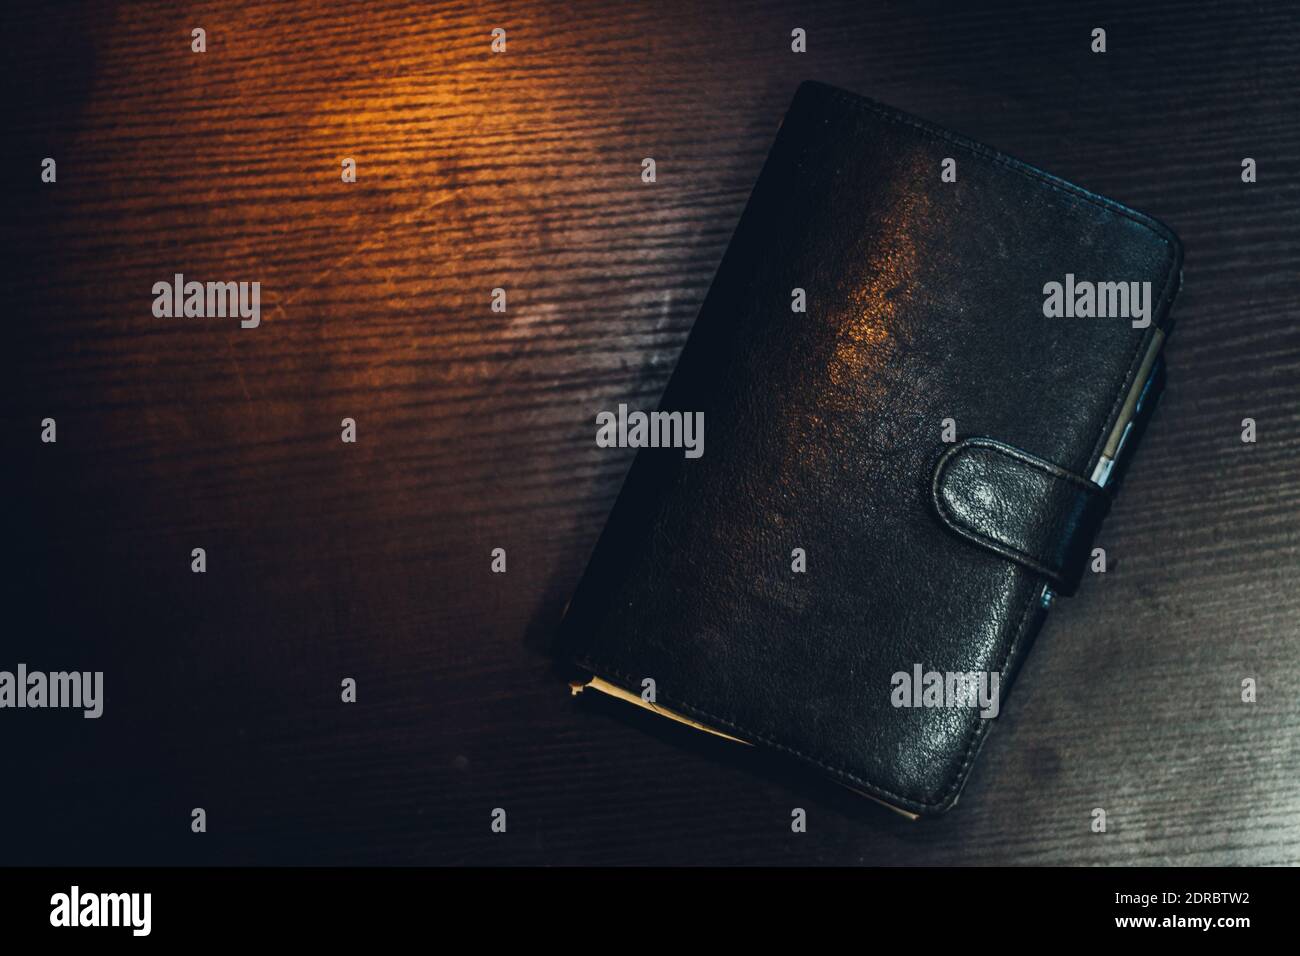 Directly Above Shot Of Closed Leather Diary On Table Stock Photo